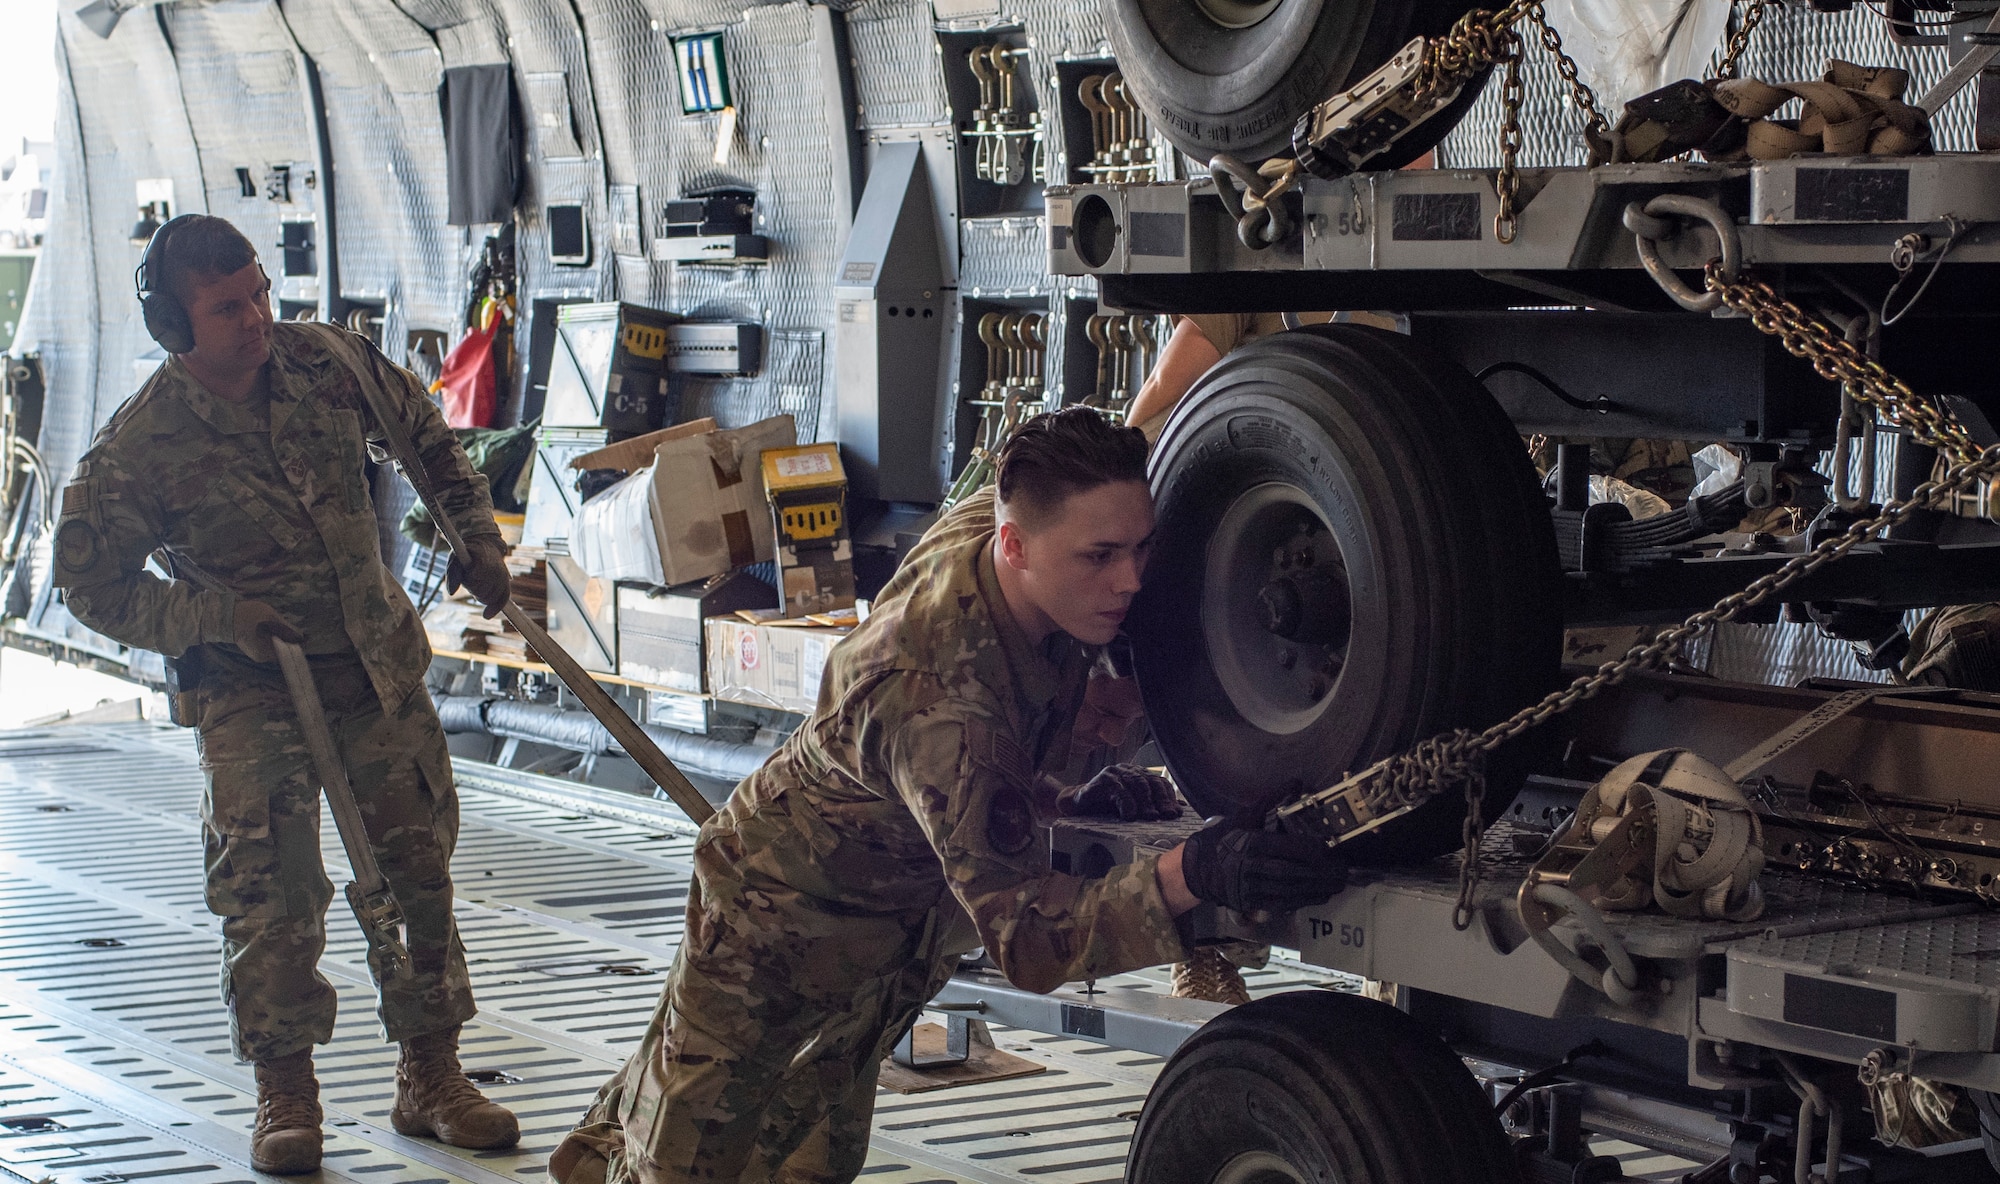 From left, U.S. Air Force Tech. Sgt. William Young, a 20th Logistics Readiness Squadron aerial transportation specialist, and Senior Airman Brandon Driver, 9th Airlift Squadron loadmaster, load cargo onto a C-5M Super Galaxy, at Shaw Air Force Base, South Carolina, Oct. 24, 2019.